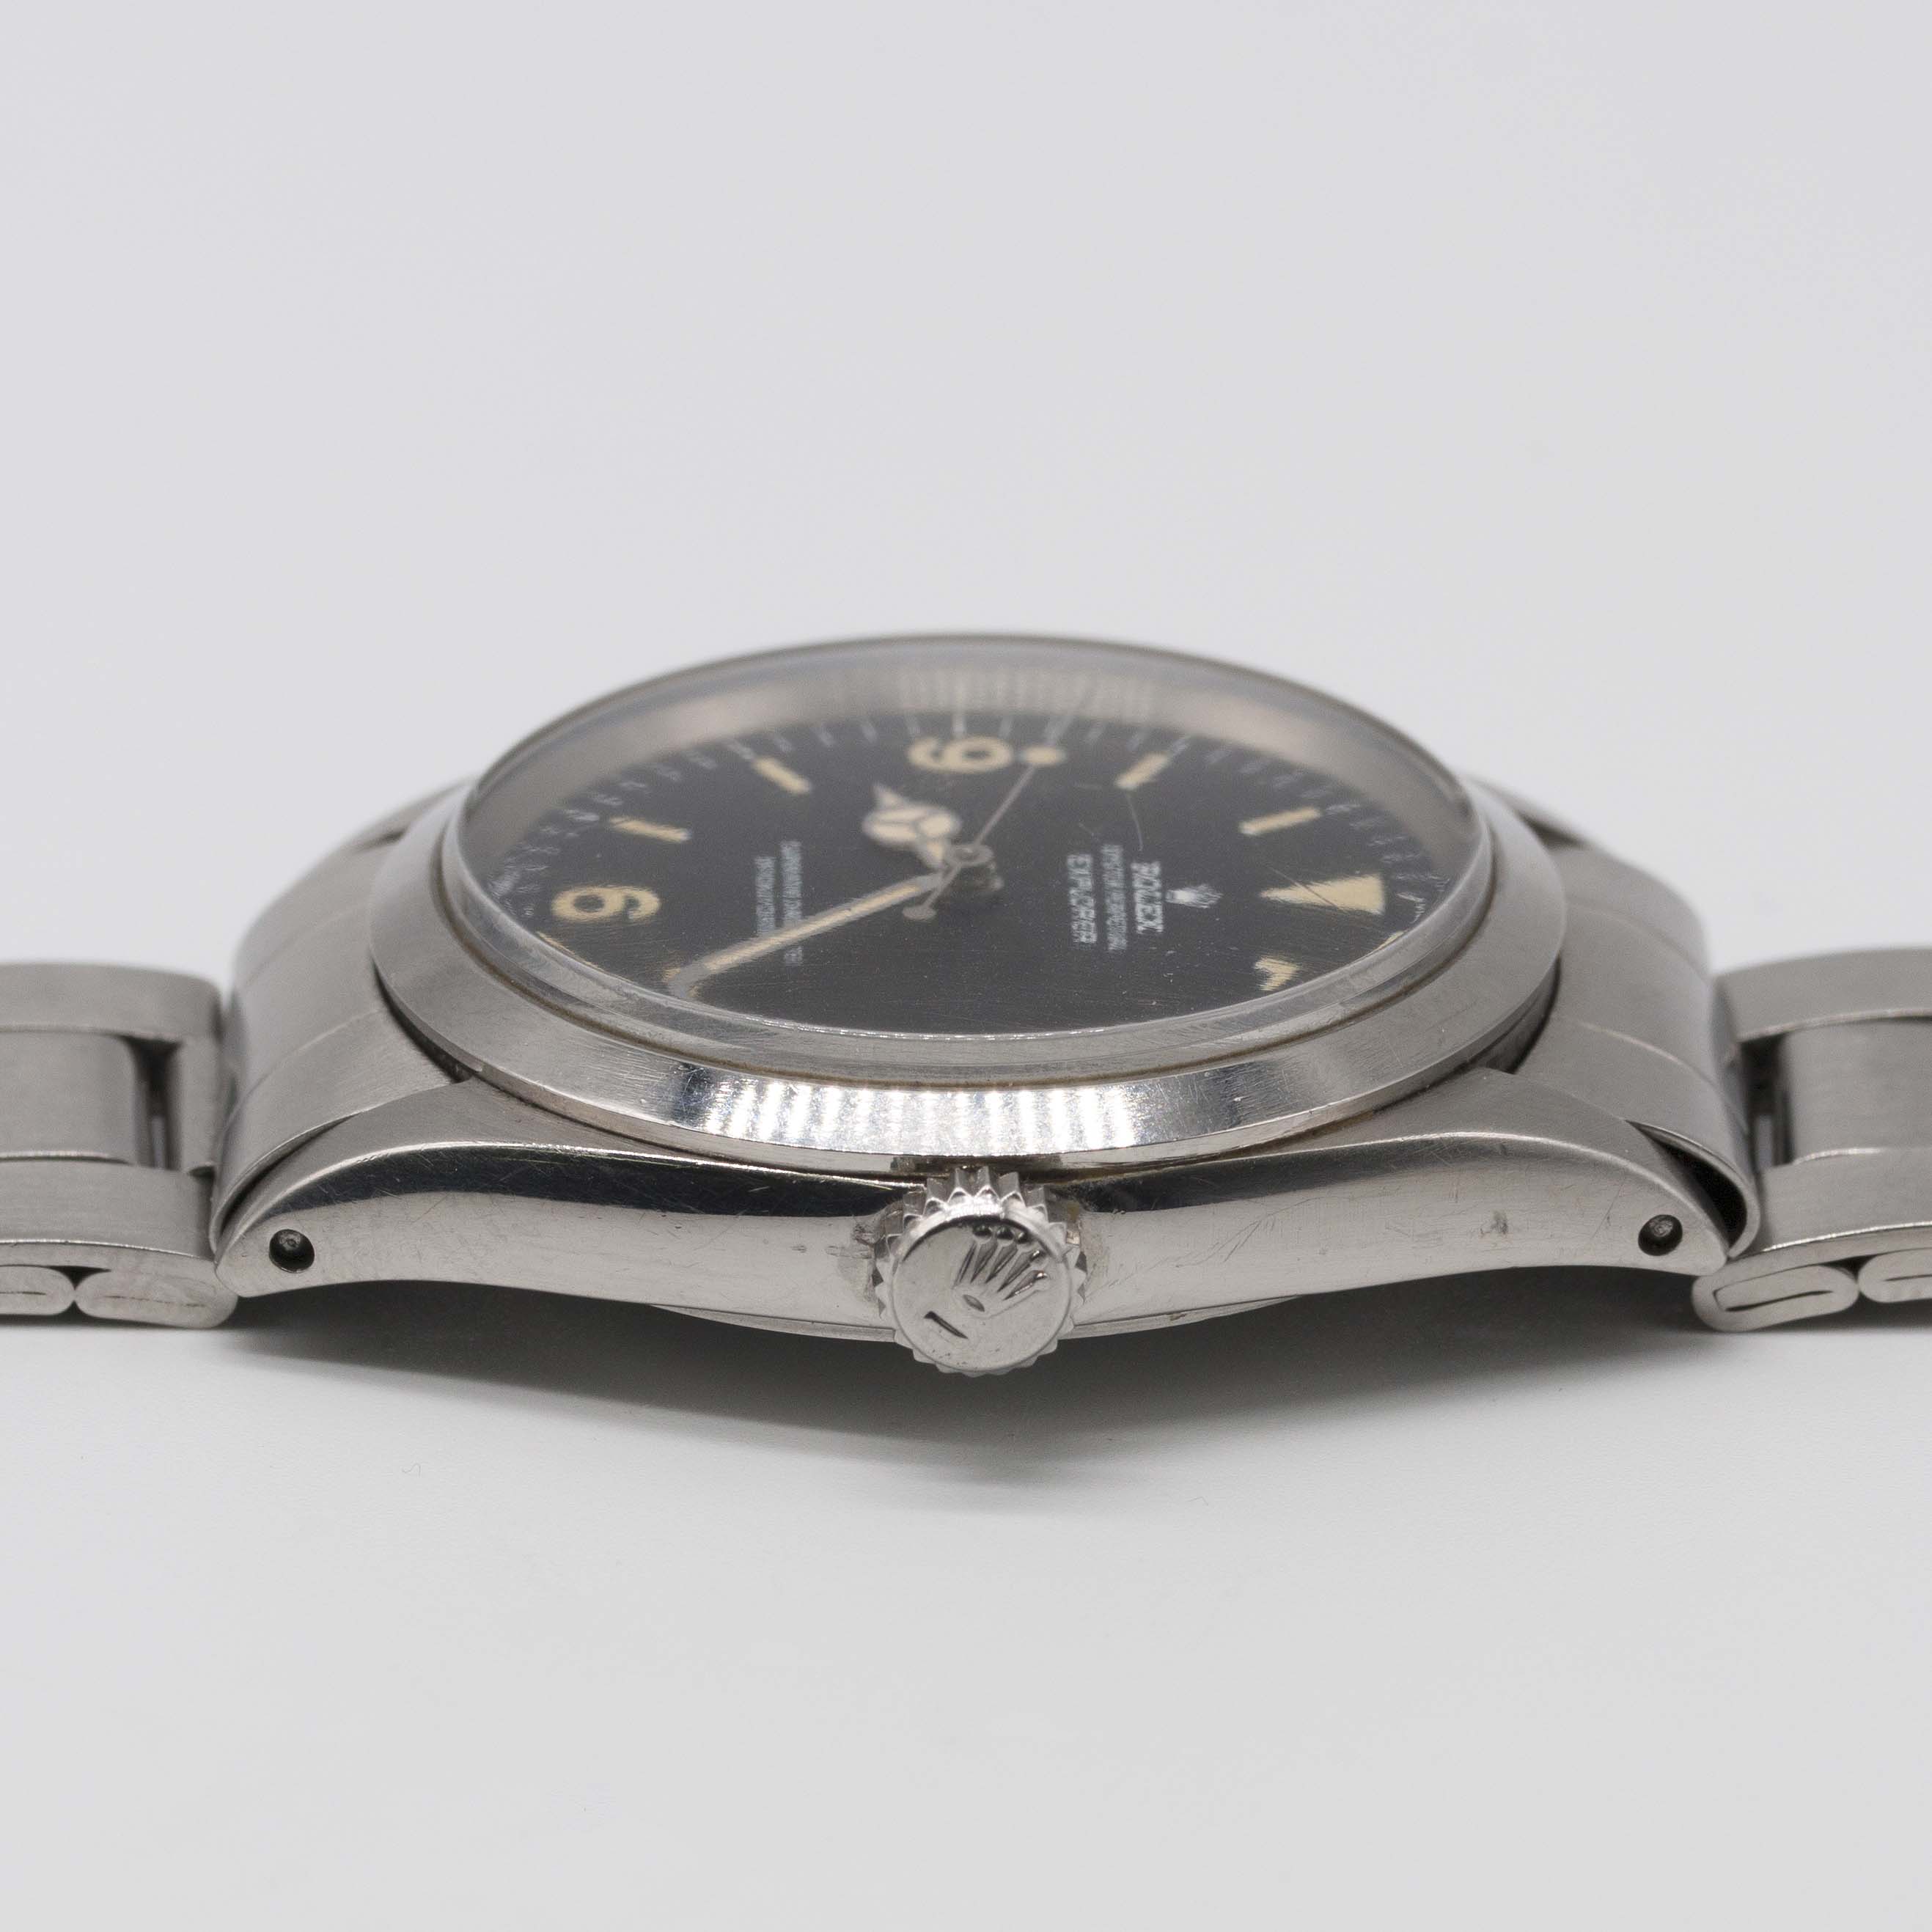 A RARE GENTLEMAN'S STAINLESS STEEL ROLEX OYSTER PERPETUAL EXPLORER BRACELET WATCH CIRCA 1972, REF. - Image 12 of 13